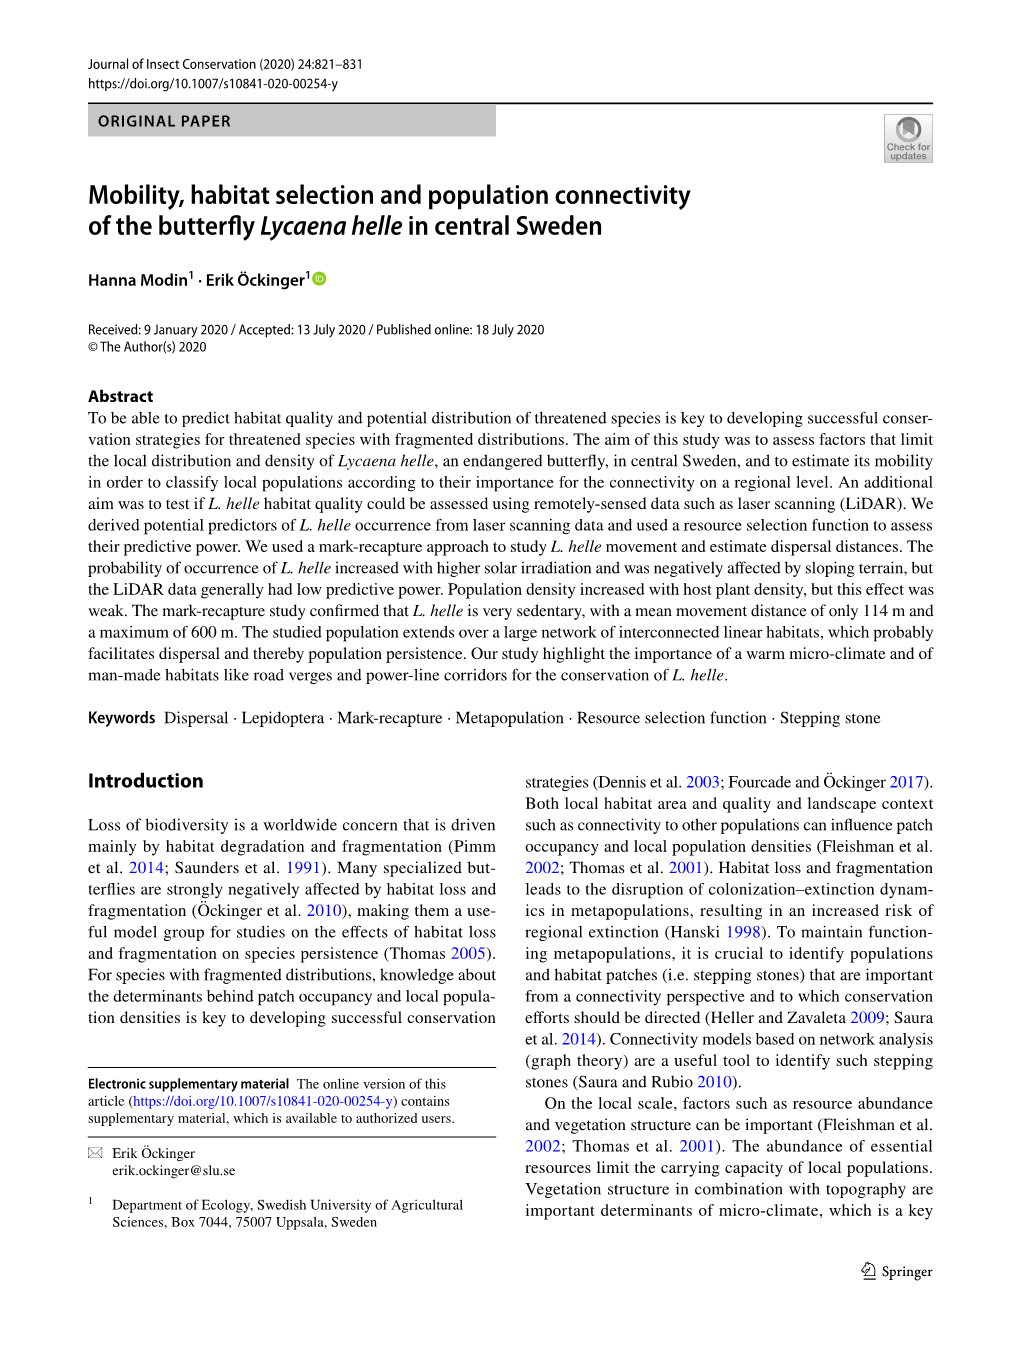 Mobility, Habitat Selection and Population Connectivity of the Butterfy Lycaena Helle in Central Sweden